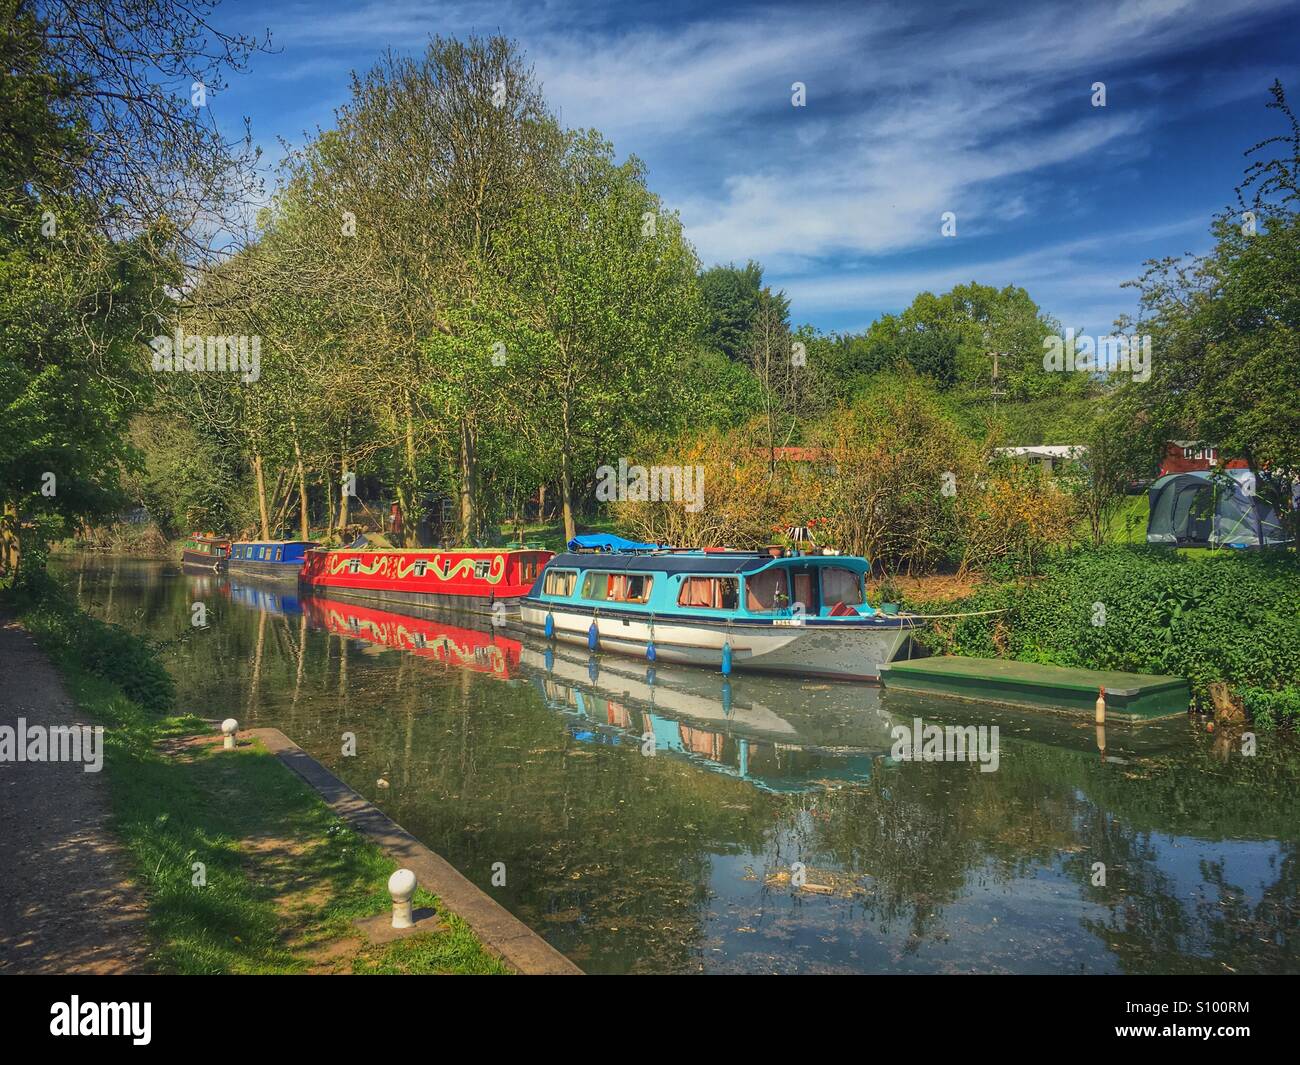 Canal boats on the river Stock Photo